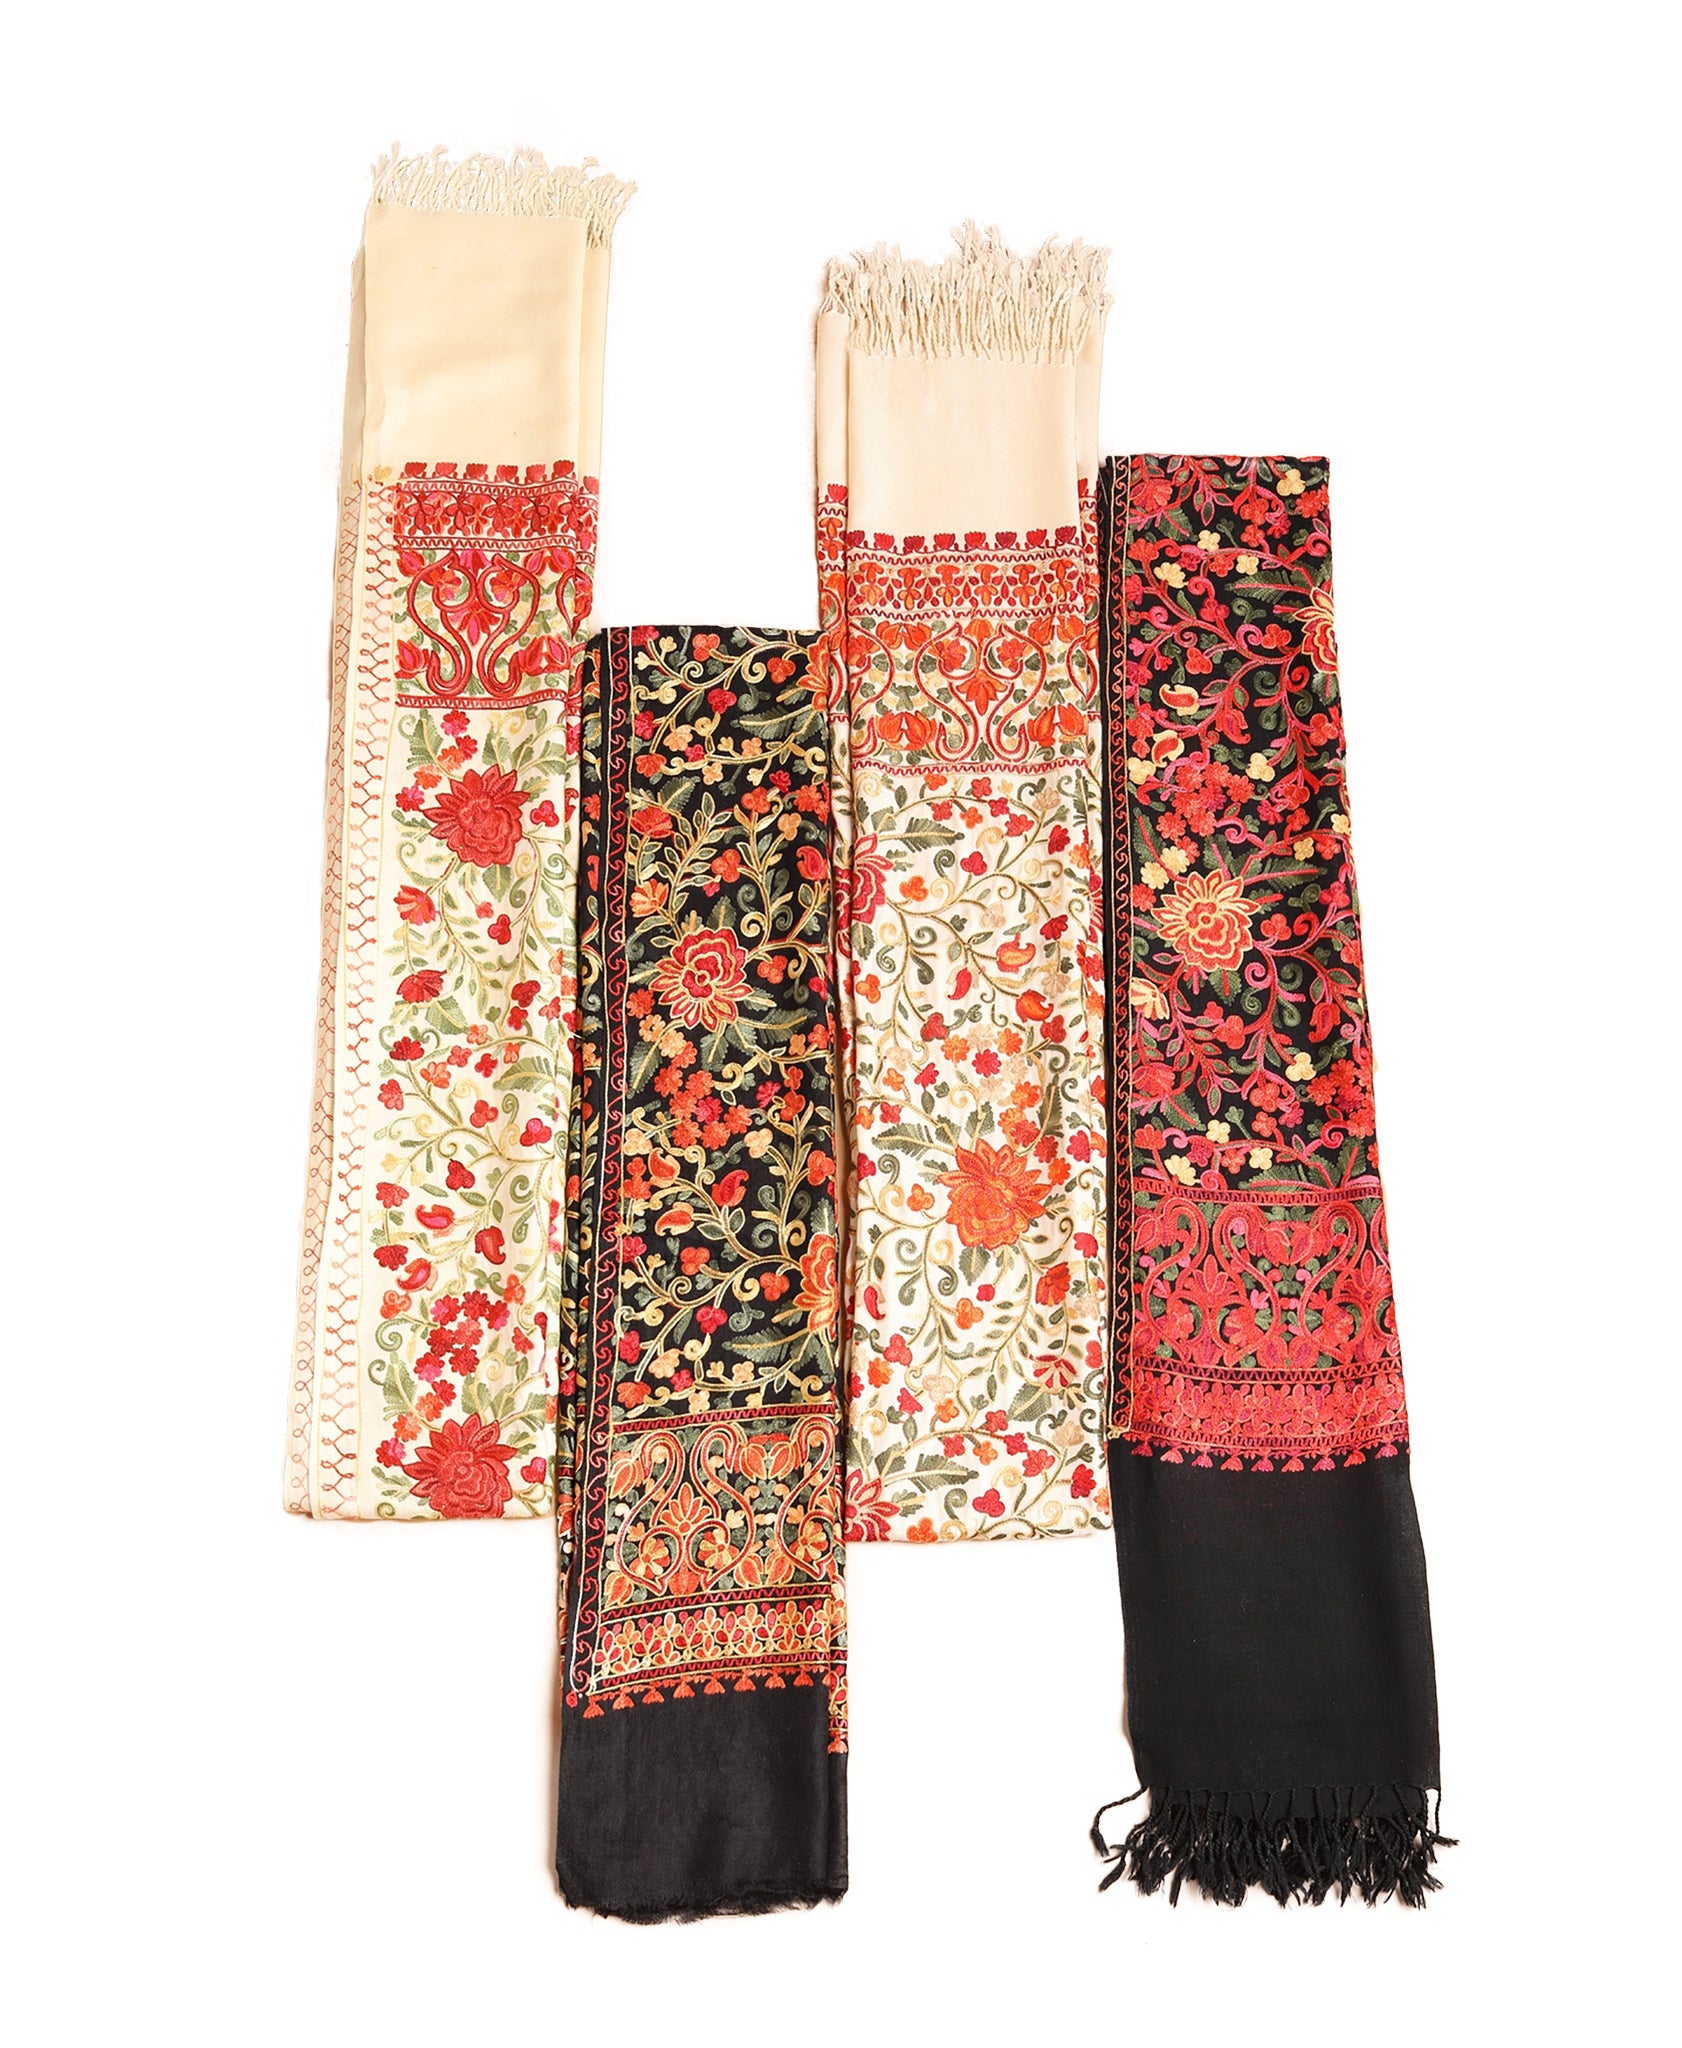 Colorful Floral Embroidery Cashmere Stole